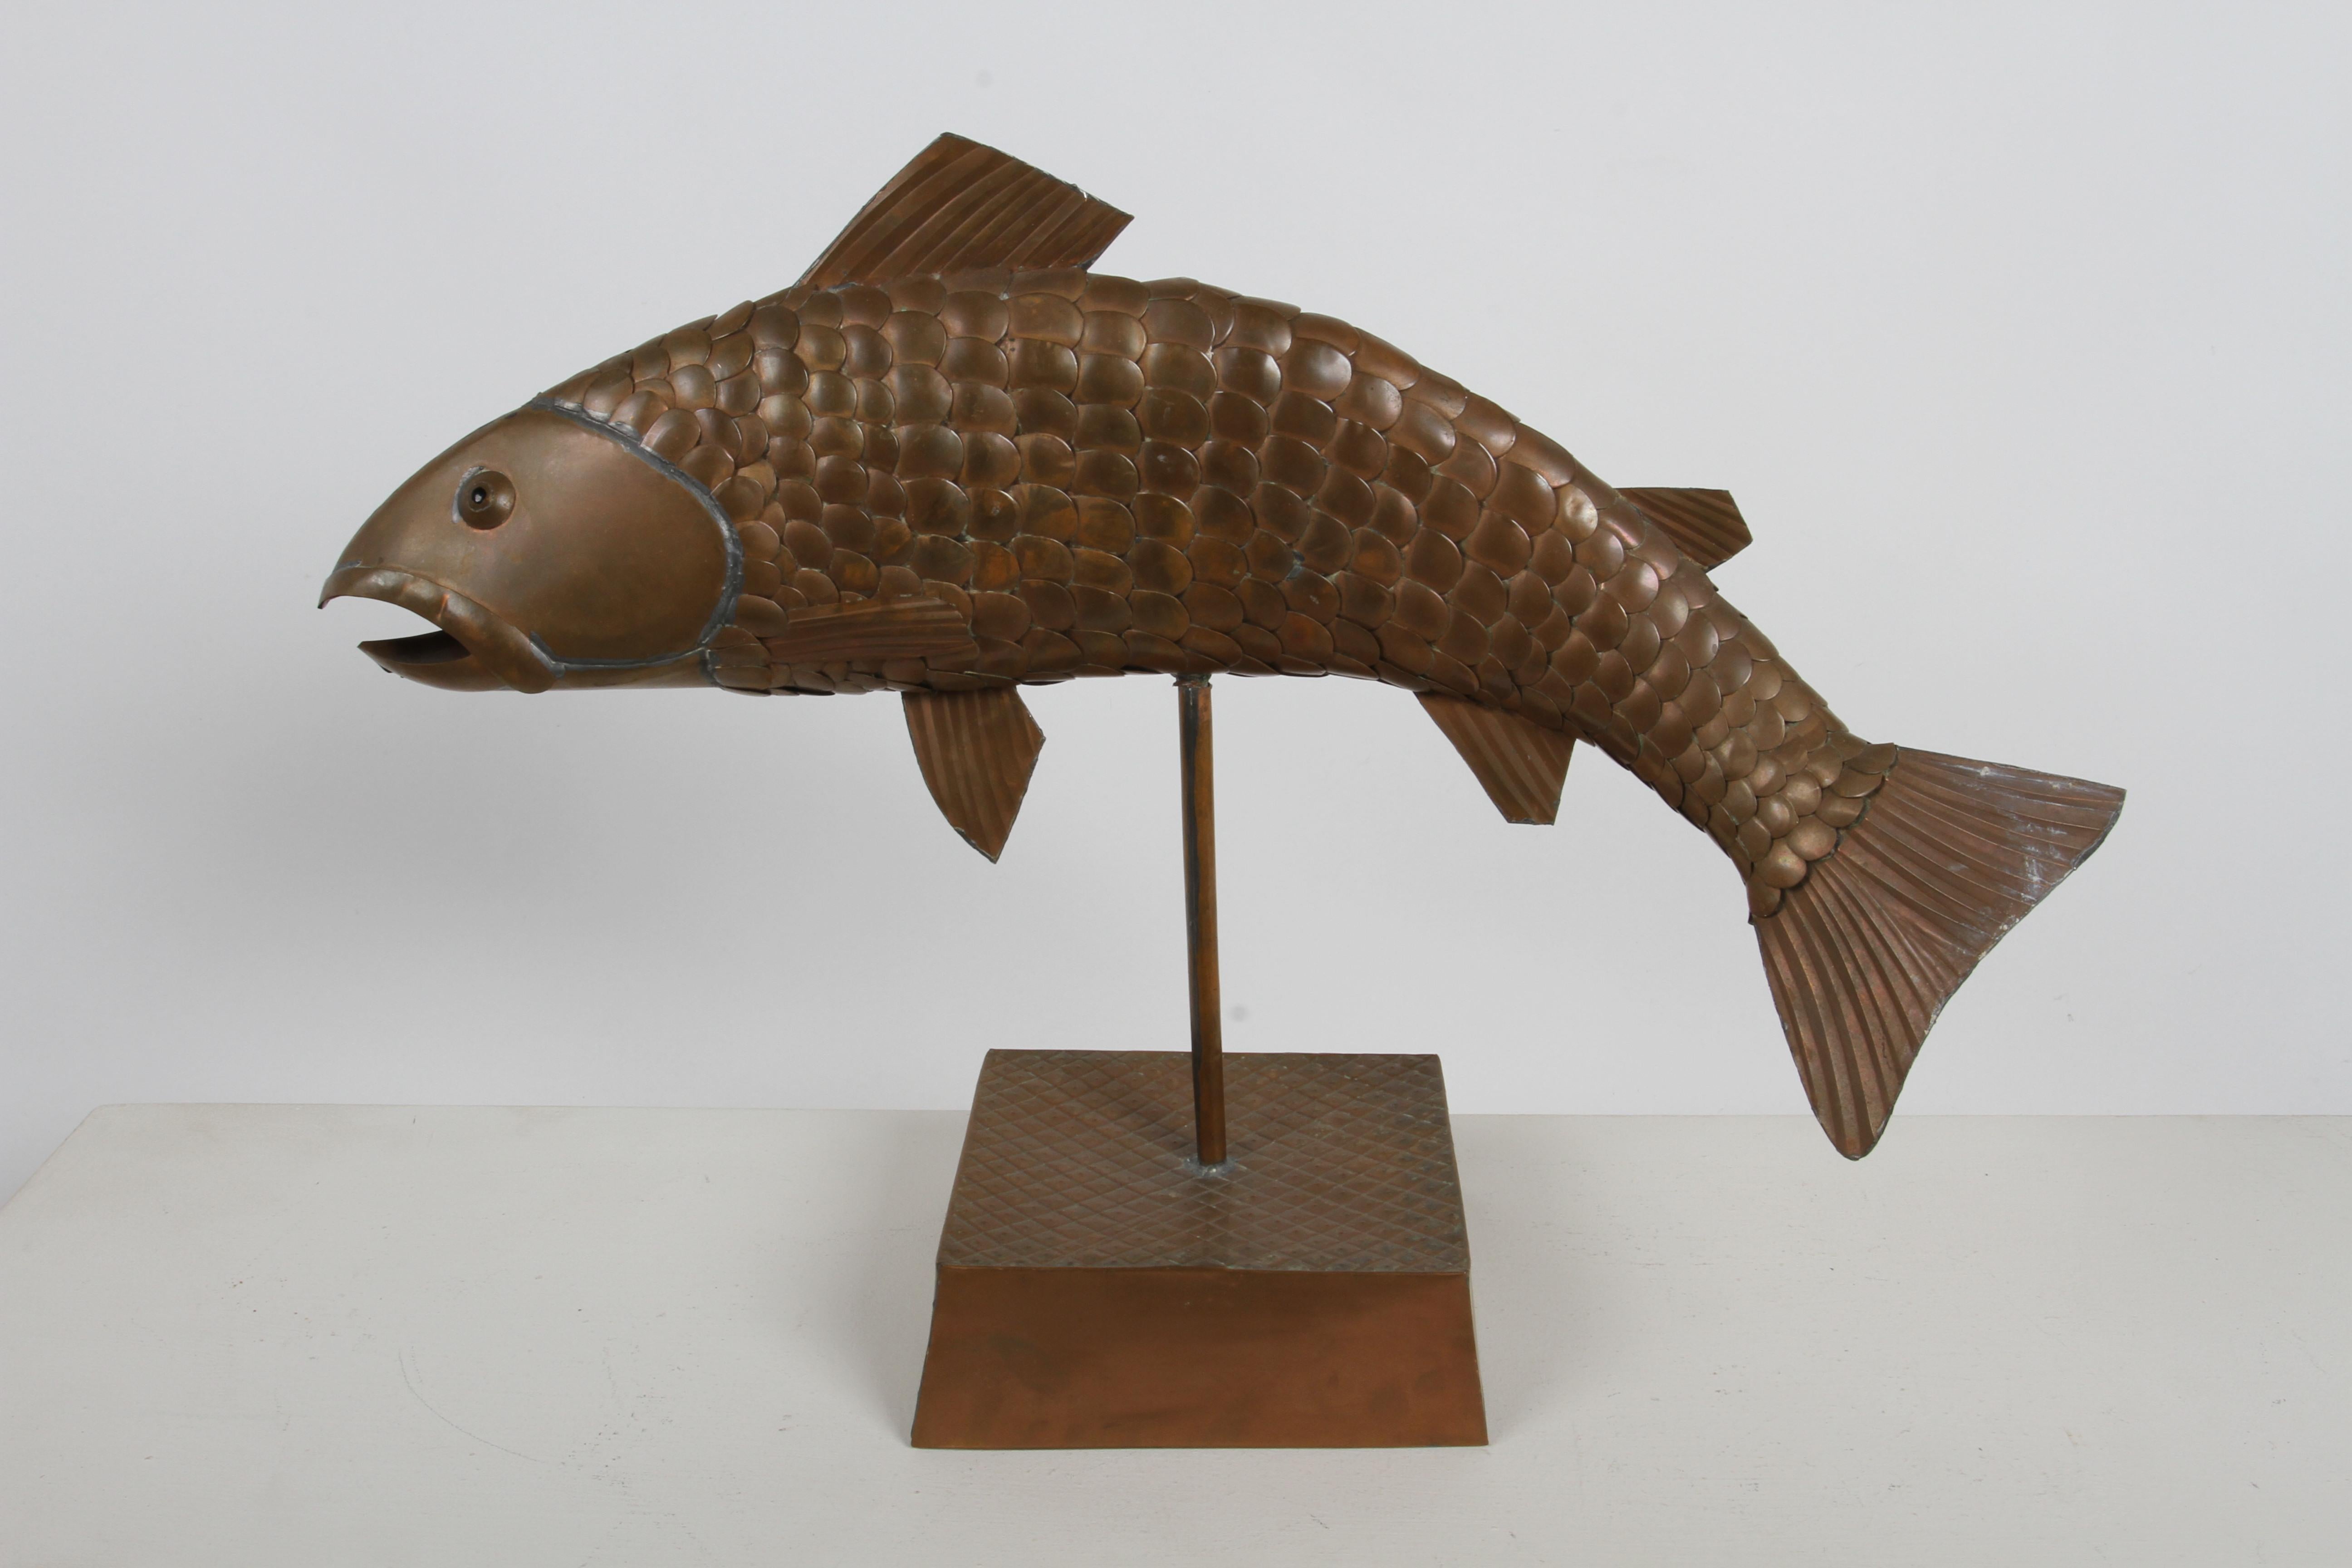 Artist Sergio Bustamante Mexican ( 1934-2014 ) mounted sculpture of a fish made of copper with copper scales on raised base.  Signed and numbered in black ink, Sergio Bustamante, edition # 33/100. 